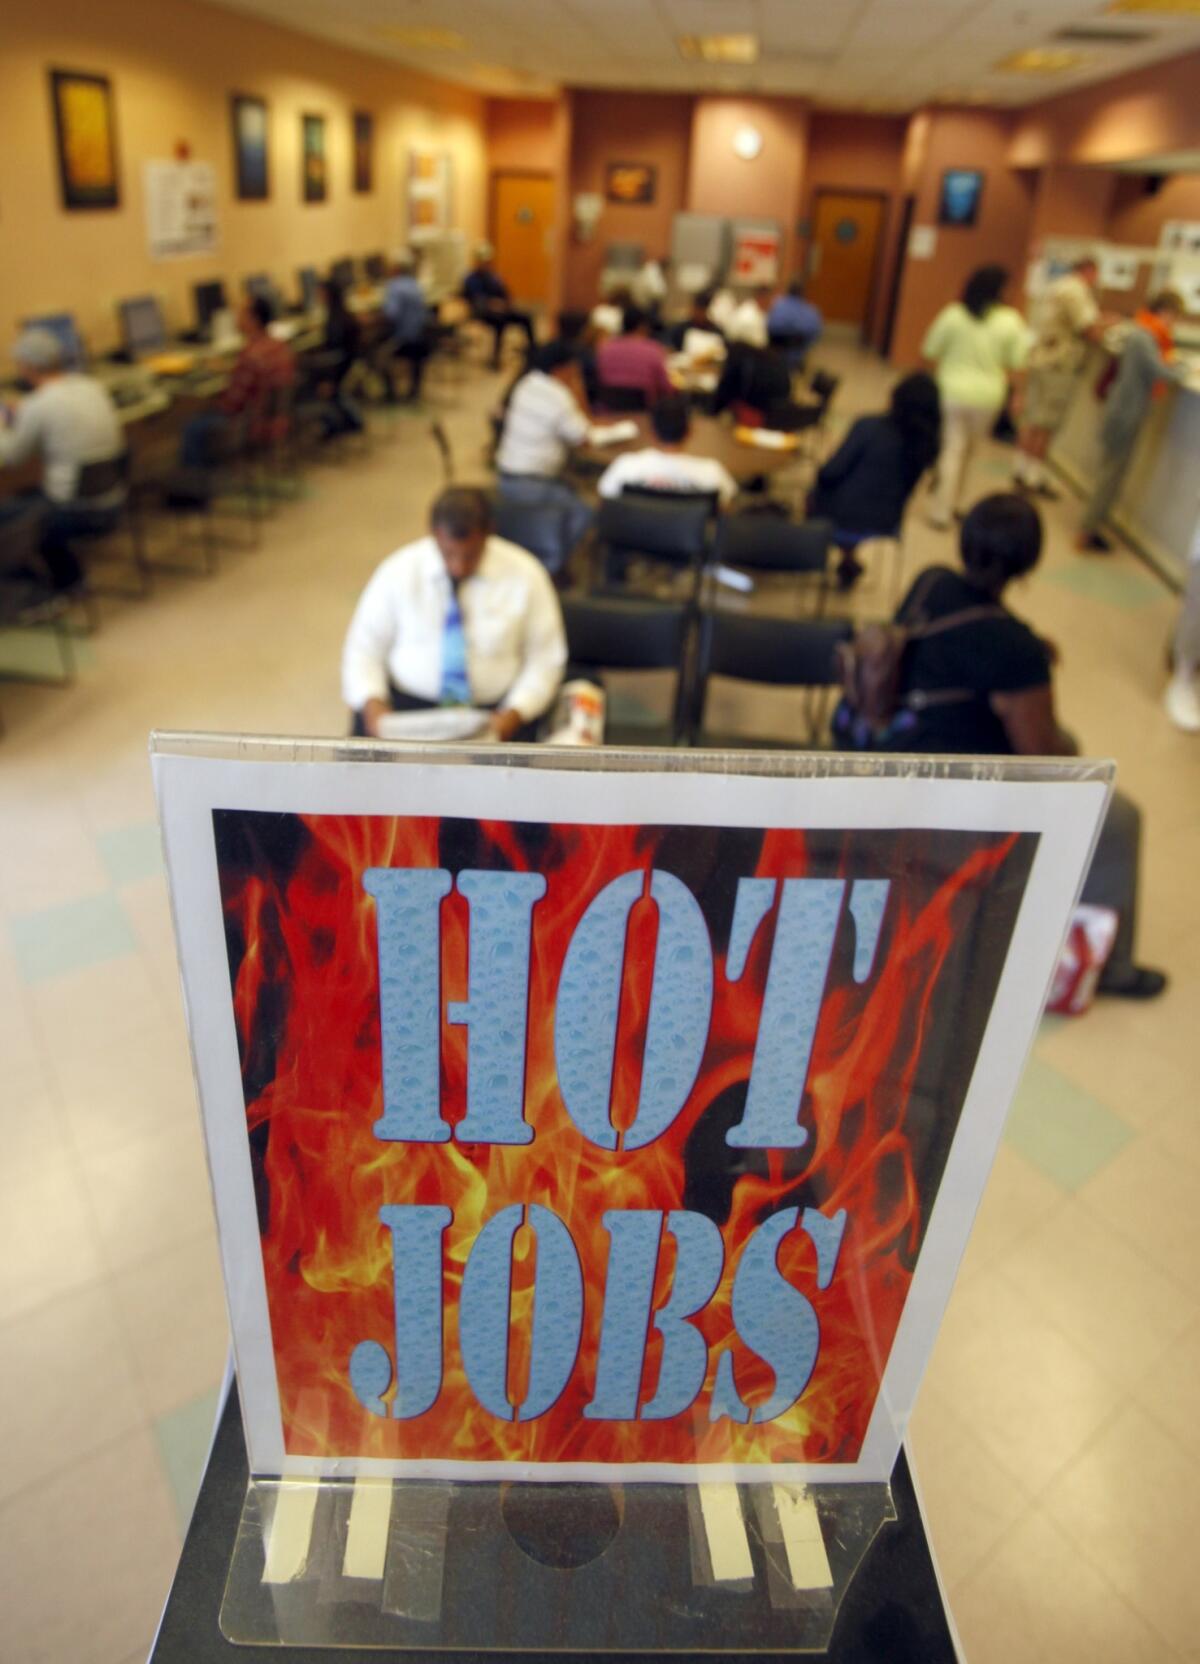 People looking for work at the Verdugo Jobs Center in Glendale, Calif. last month.